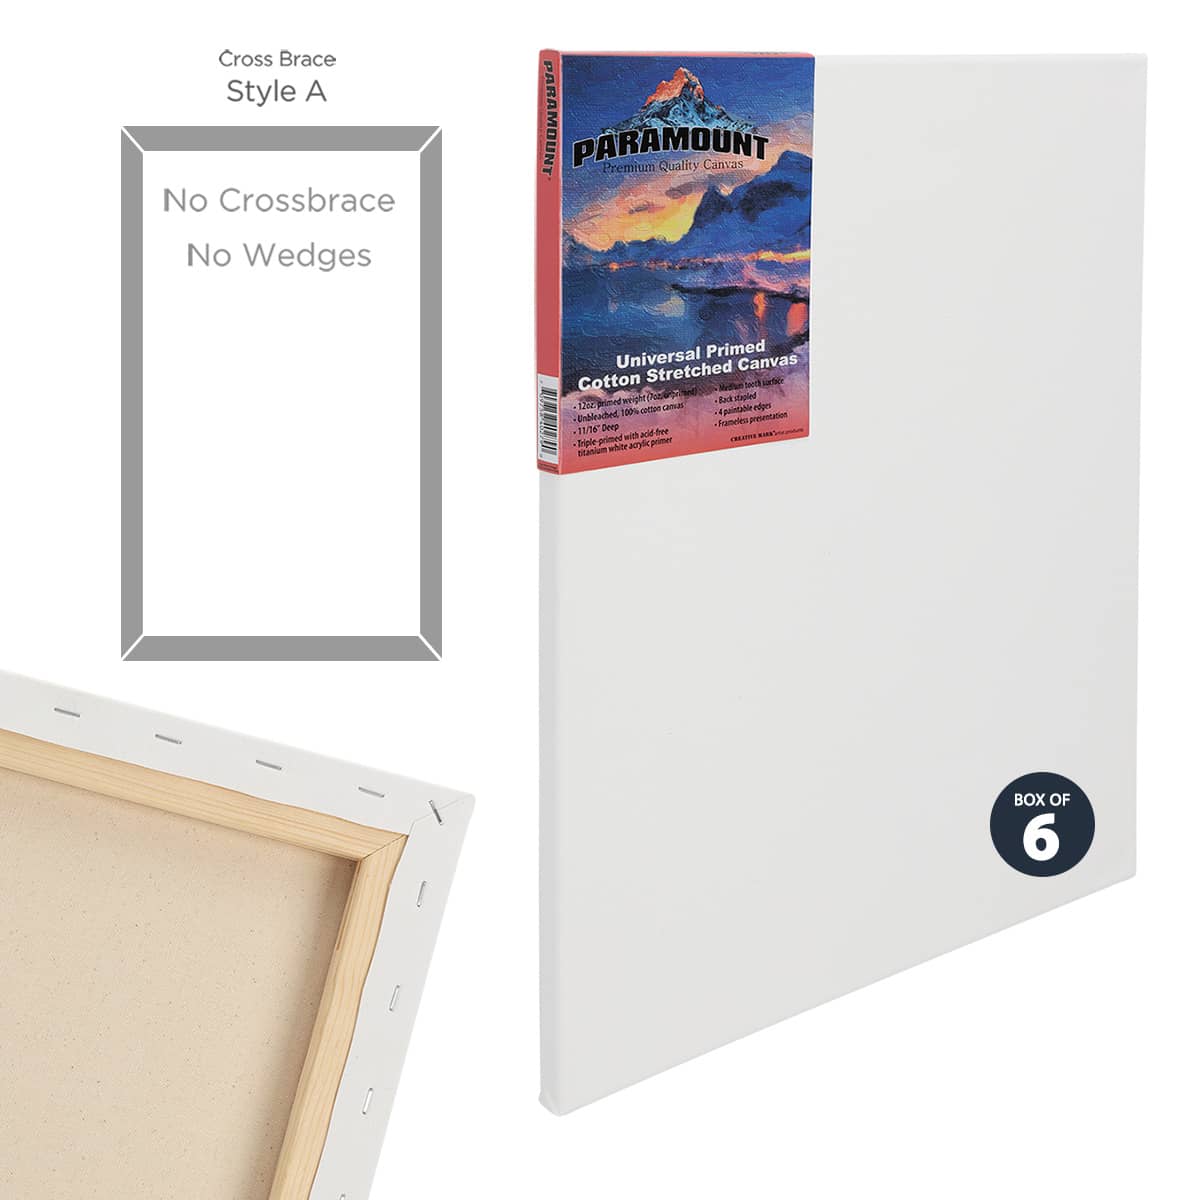 Paramount Professional Cotton Stretched Canvas Boxes of 6